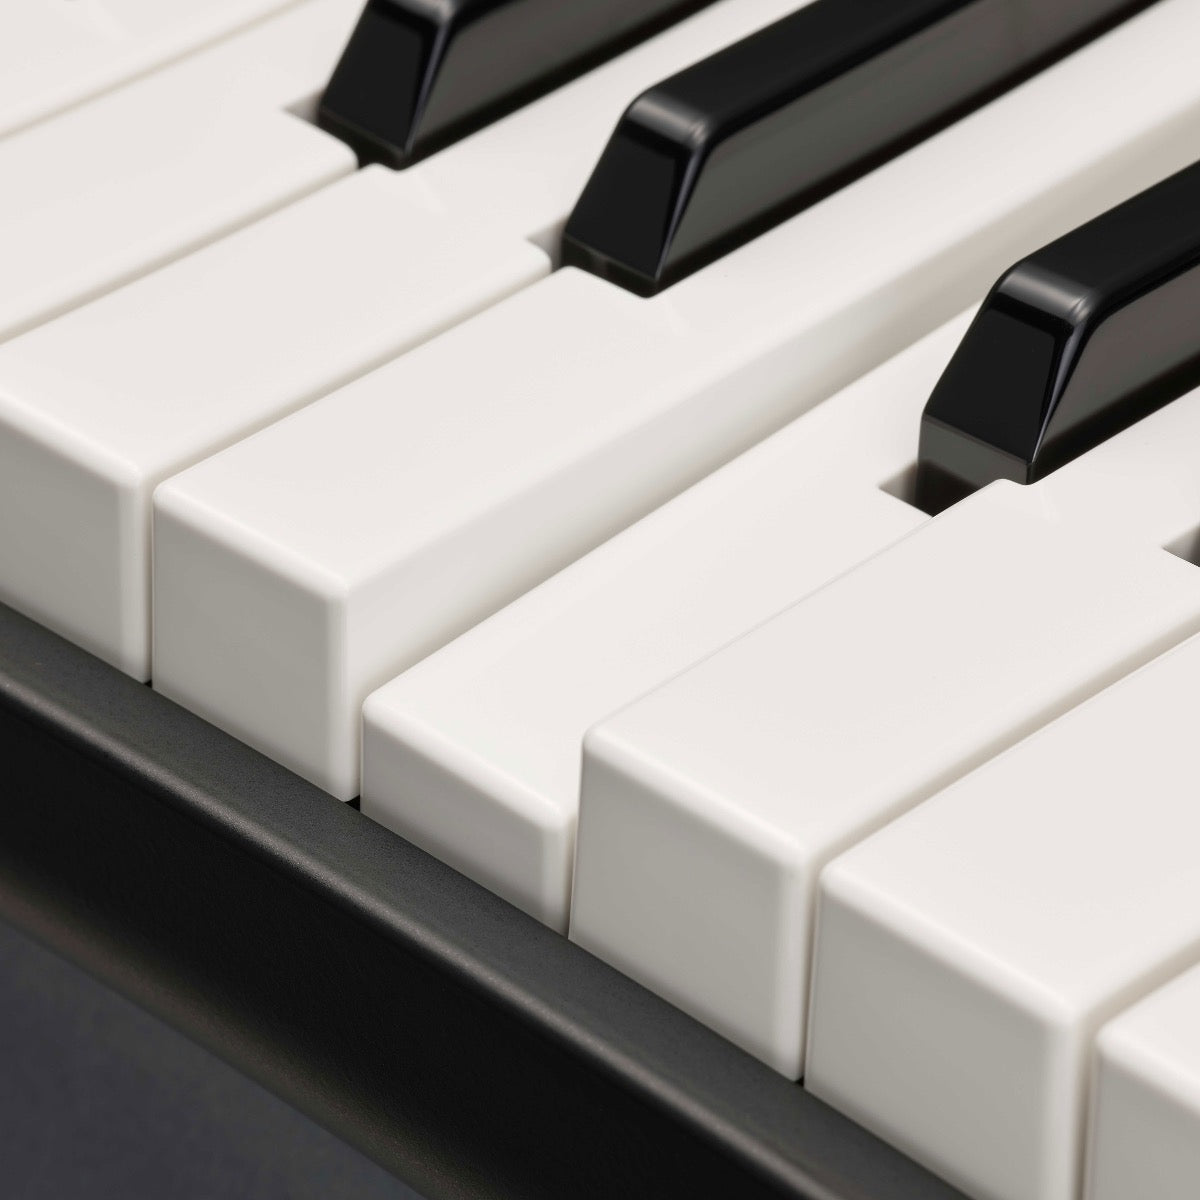 Detail view of Yamaha YC61 73-Key Stage Keyboard and Organ showing portion of keybed with one key depressed